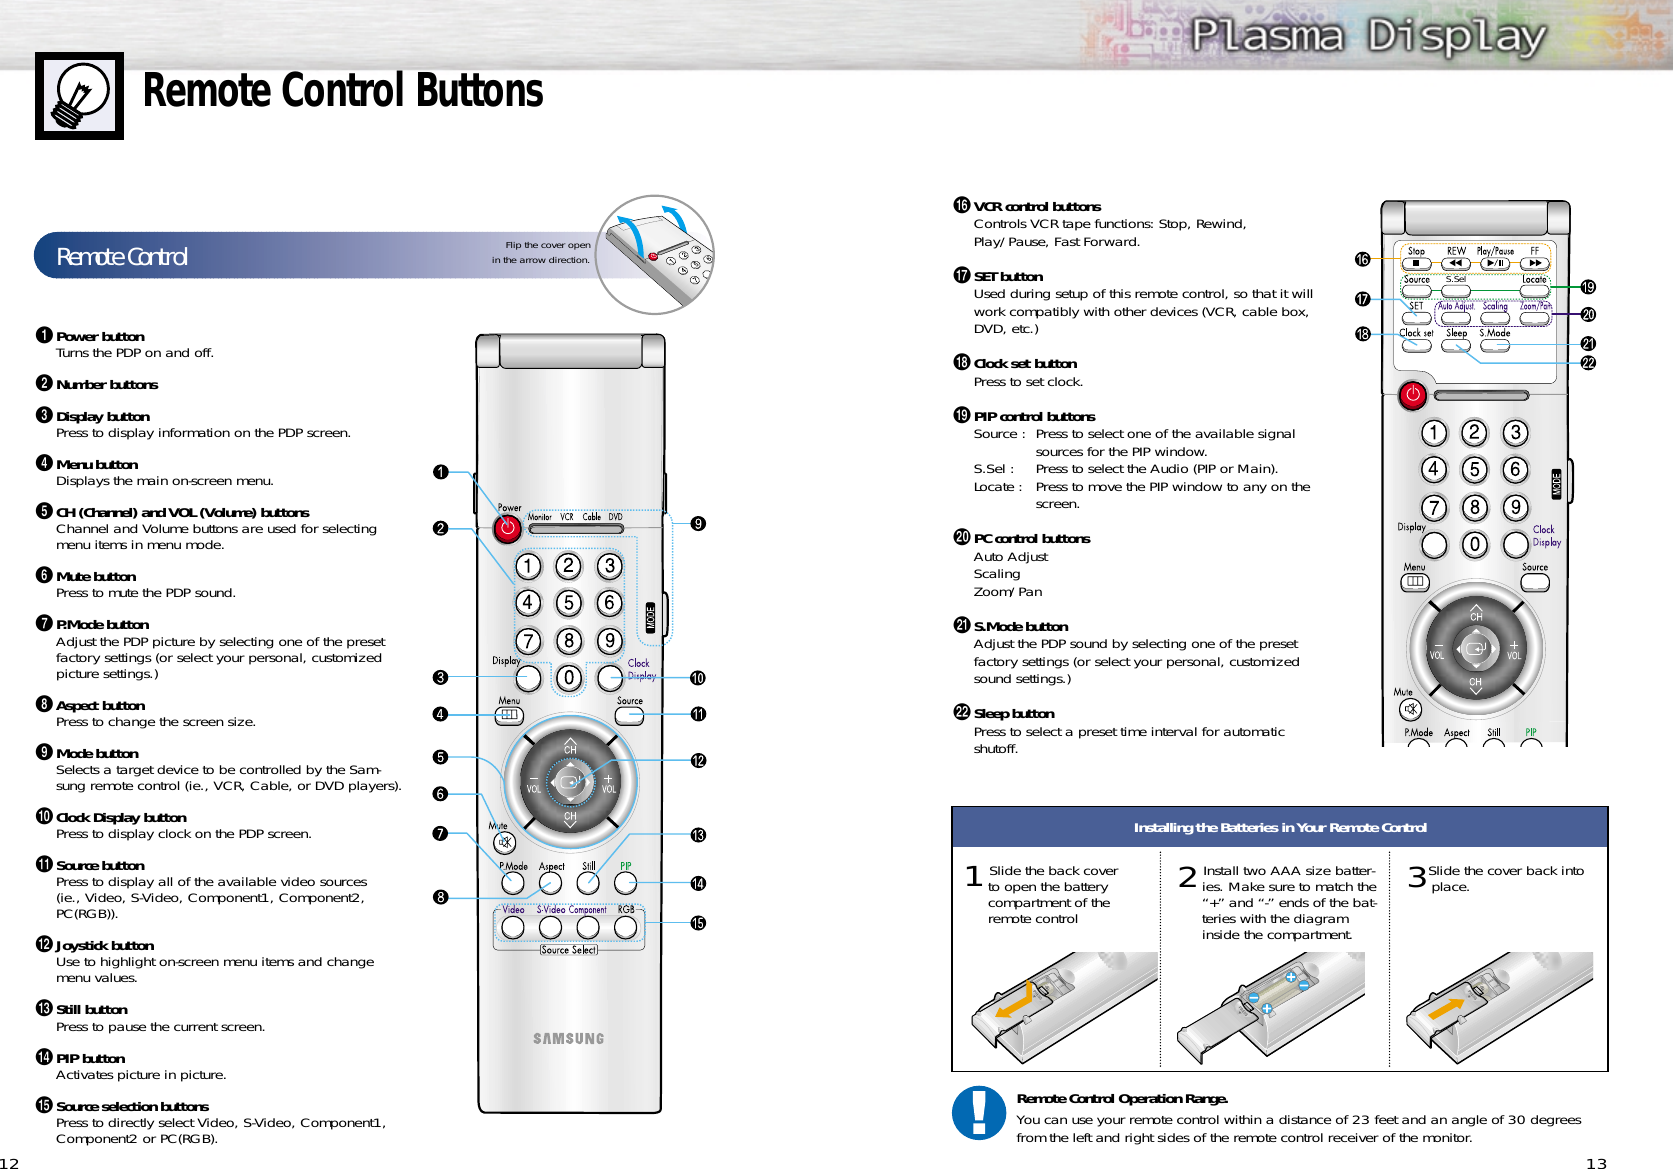 ıVCR control buttonsControls VCR tape functions: Stop, Rewind,Play/Pause, Fast Forward.˜SET buttonUsed during setup of this remote control, so that it willwork compatibly with other devices (VCR, cable box,DVD, etc.)¯Clock set buttonPress to set clock.˘PIP control buttonsSource : Press to select one of the available signalsources for the PIP window.S.Sel : Press to select the Audio (PIP or Main).Locate : Press to move the PIP window to any on thescreen.¿PC control buttonsAuto AdjustScalingZoom/Pan¸S.Mode buttonAdjust the PDP sound by selecting one of the presetfactory settings (or select your personal, customizedsound settings.)˛Sleep buttonPress to select a preset time interval for automatic shutoff.S.Sel13Remote Control ButtonsŒPower buttonTurns the PDP on and off.´Number buttonsˇDisplay buttonPress to display information on the PDP screen.¨Menu buttonDisplays the main on-screen menu.ˆCH (Channel) and VOL (Volume) buttonsChannel and Volume buttons are used for selectingmenu items in menu mode.ØMute buttonPress to mute the PDP sound.∏P.Mode buttonAdjust the PDP picture by selecting one of the presetfactory settings (or select your personal, customizedpicture settings.)”Aspect buttonPress to change the screen size.’Mode buttonSelects a target device to be controlled by the Sam-sung remote control (ie., VCR, Cable, or DVD players).˝Clock Display buttonPress to display clock on the PDP screen.ÔSource buttonPress to display all of the available video sources (ie., Video, S-Video, Component1, Component2, PC(RGB)).Joystick buttonUse to highlight on-screen menu items and changemenu values.ÒStill buttonPress to pause the current screen.ÚPIP buttonActivates picture in picture.ÆSource selection buttonsPress to directly select Video, S-Video, Component1,Component2 or PC(RGB). 12Remote ControlFlip the cover openin the arrow direction.Installing the Batteries in Your Remote Control1Slide the back coverto open the batterycompartment of theremote control3Slide the cover back intoplace.2Install two AAA size batter-ies. Make sure to match the“+” and “-” ends of the bat-teries with the diagraminside the compartment.Remote Control Operation Range.You can use your remote control within a distance of 23 feet and an angle of 30 degreesfrom the left and right sides of the remote control receiver of the monitor.